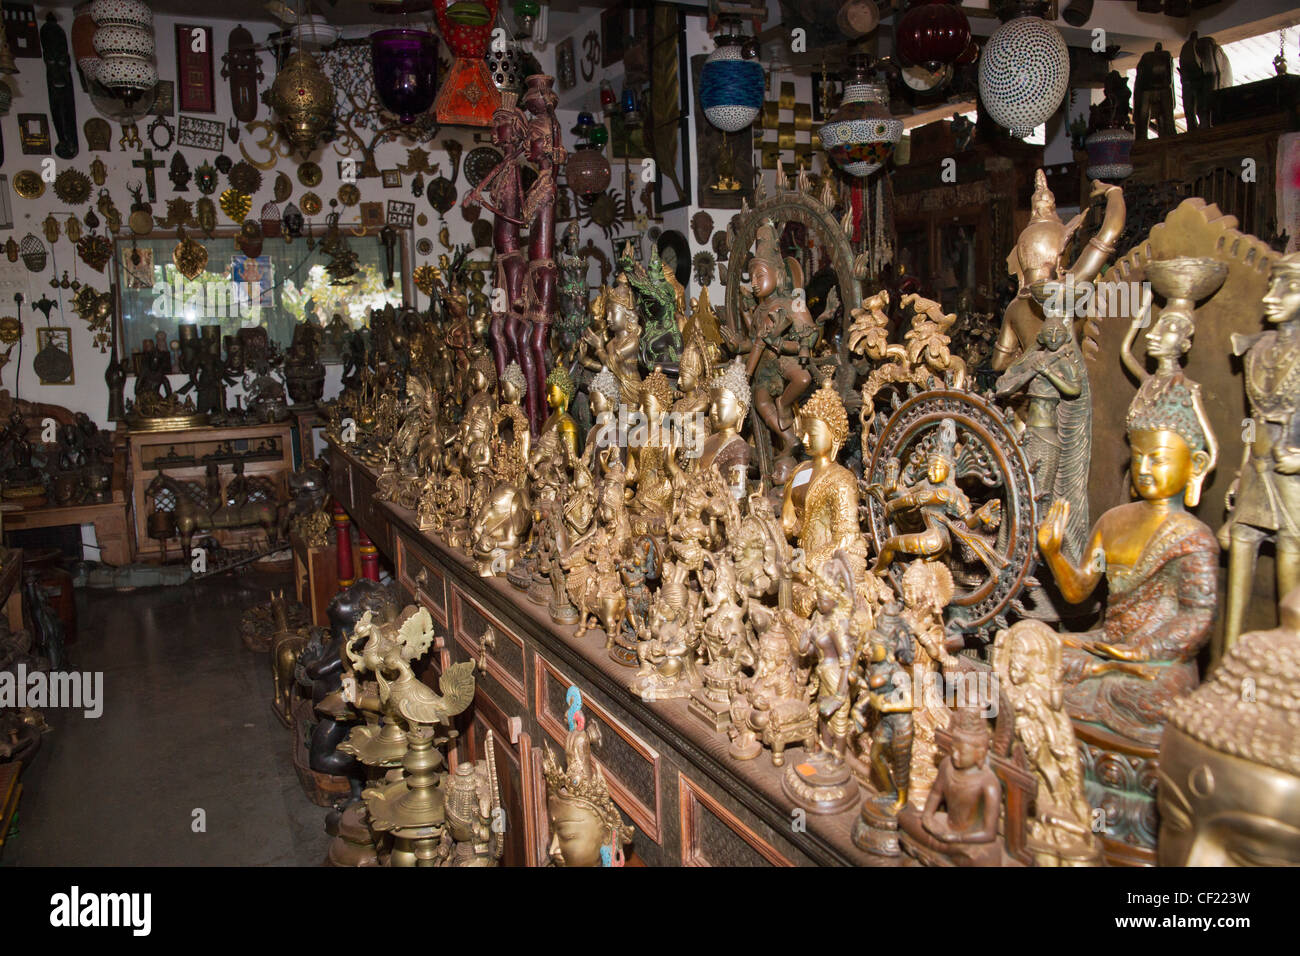 Asian artifacts and antiques. Stock Photo